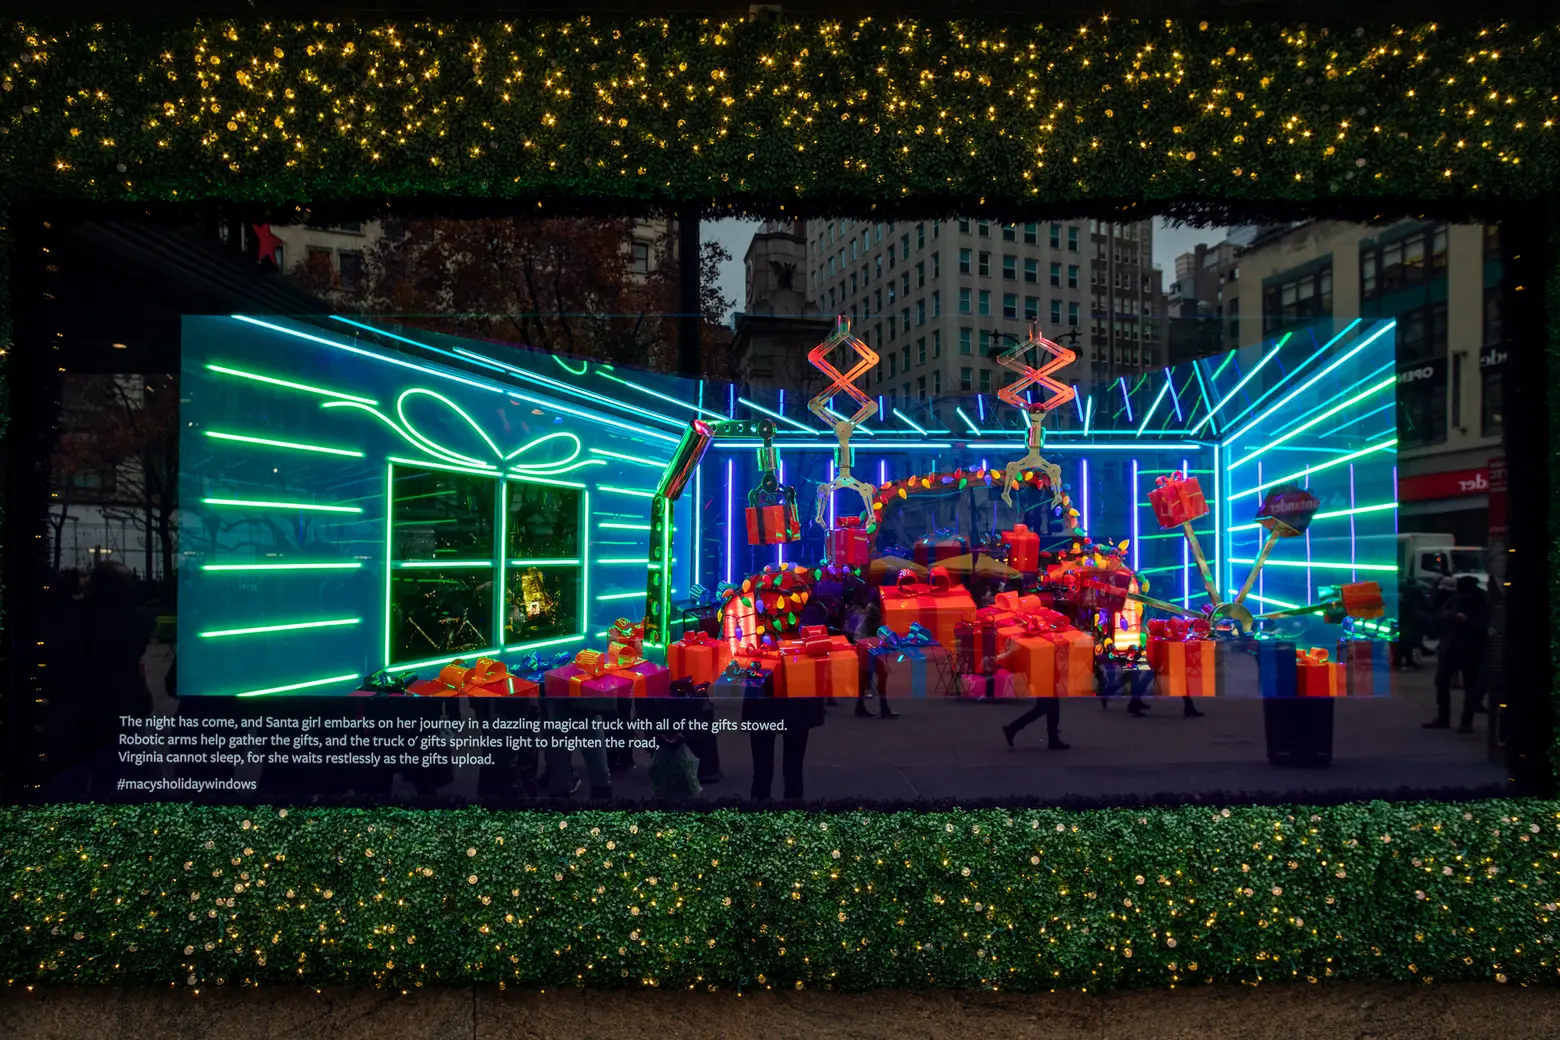 See NYC's 2019 holiday windows (without facing the crowds)